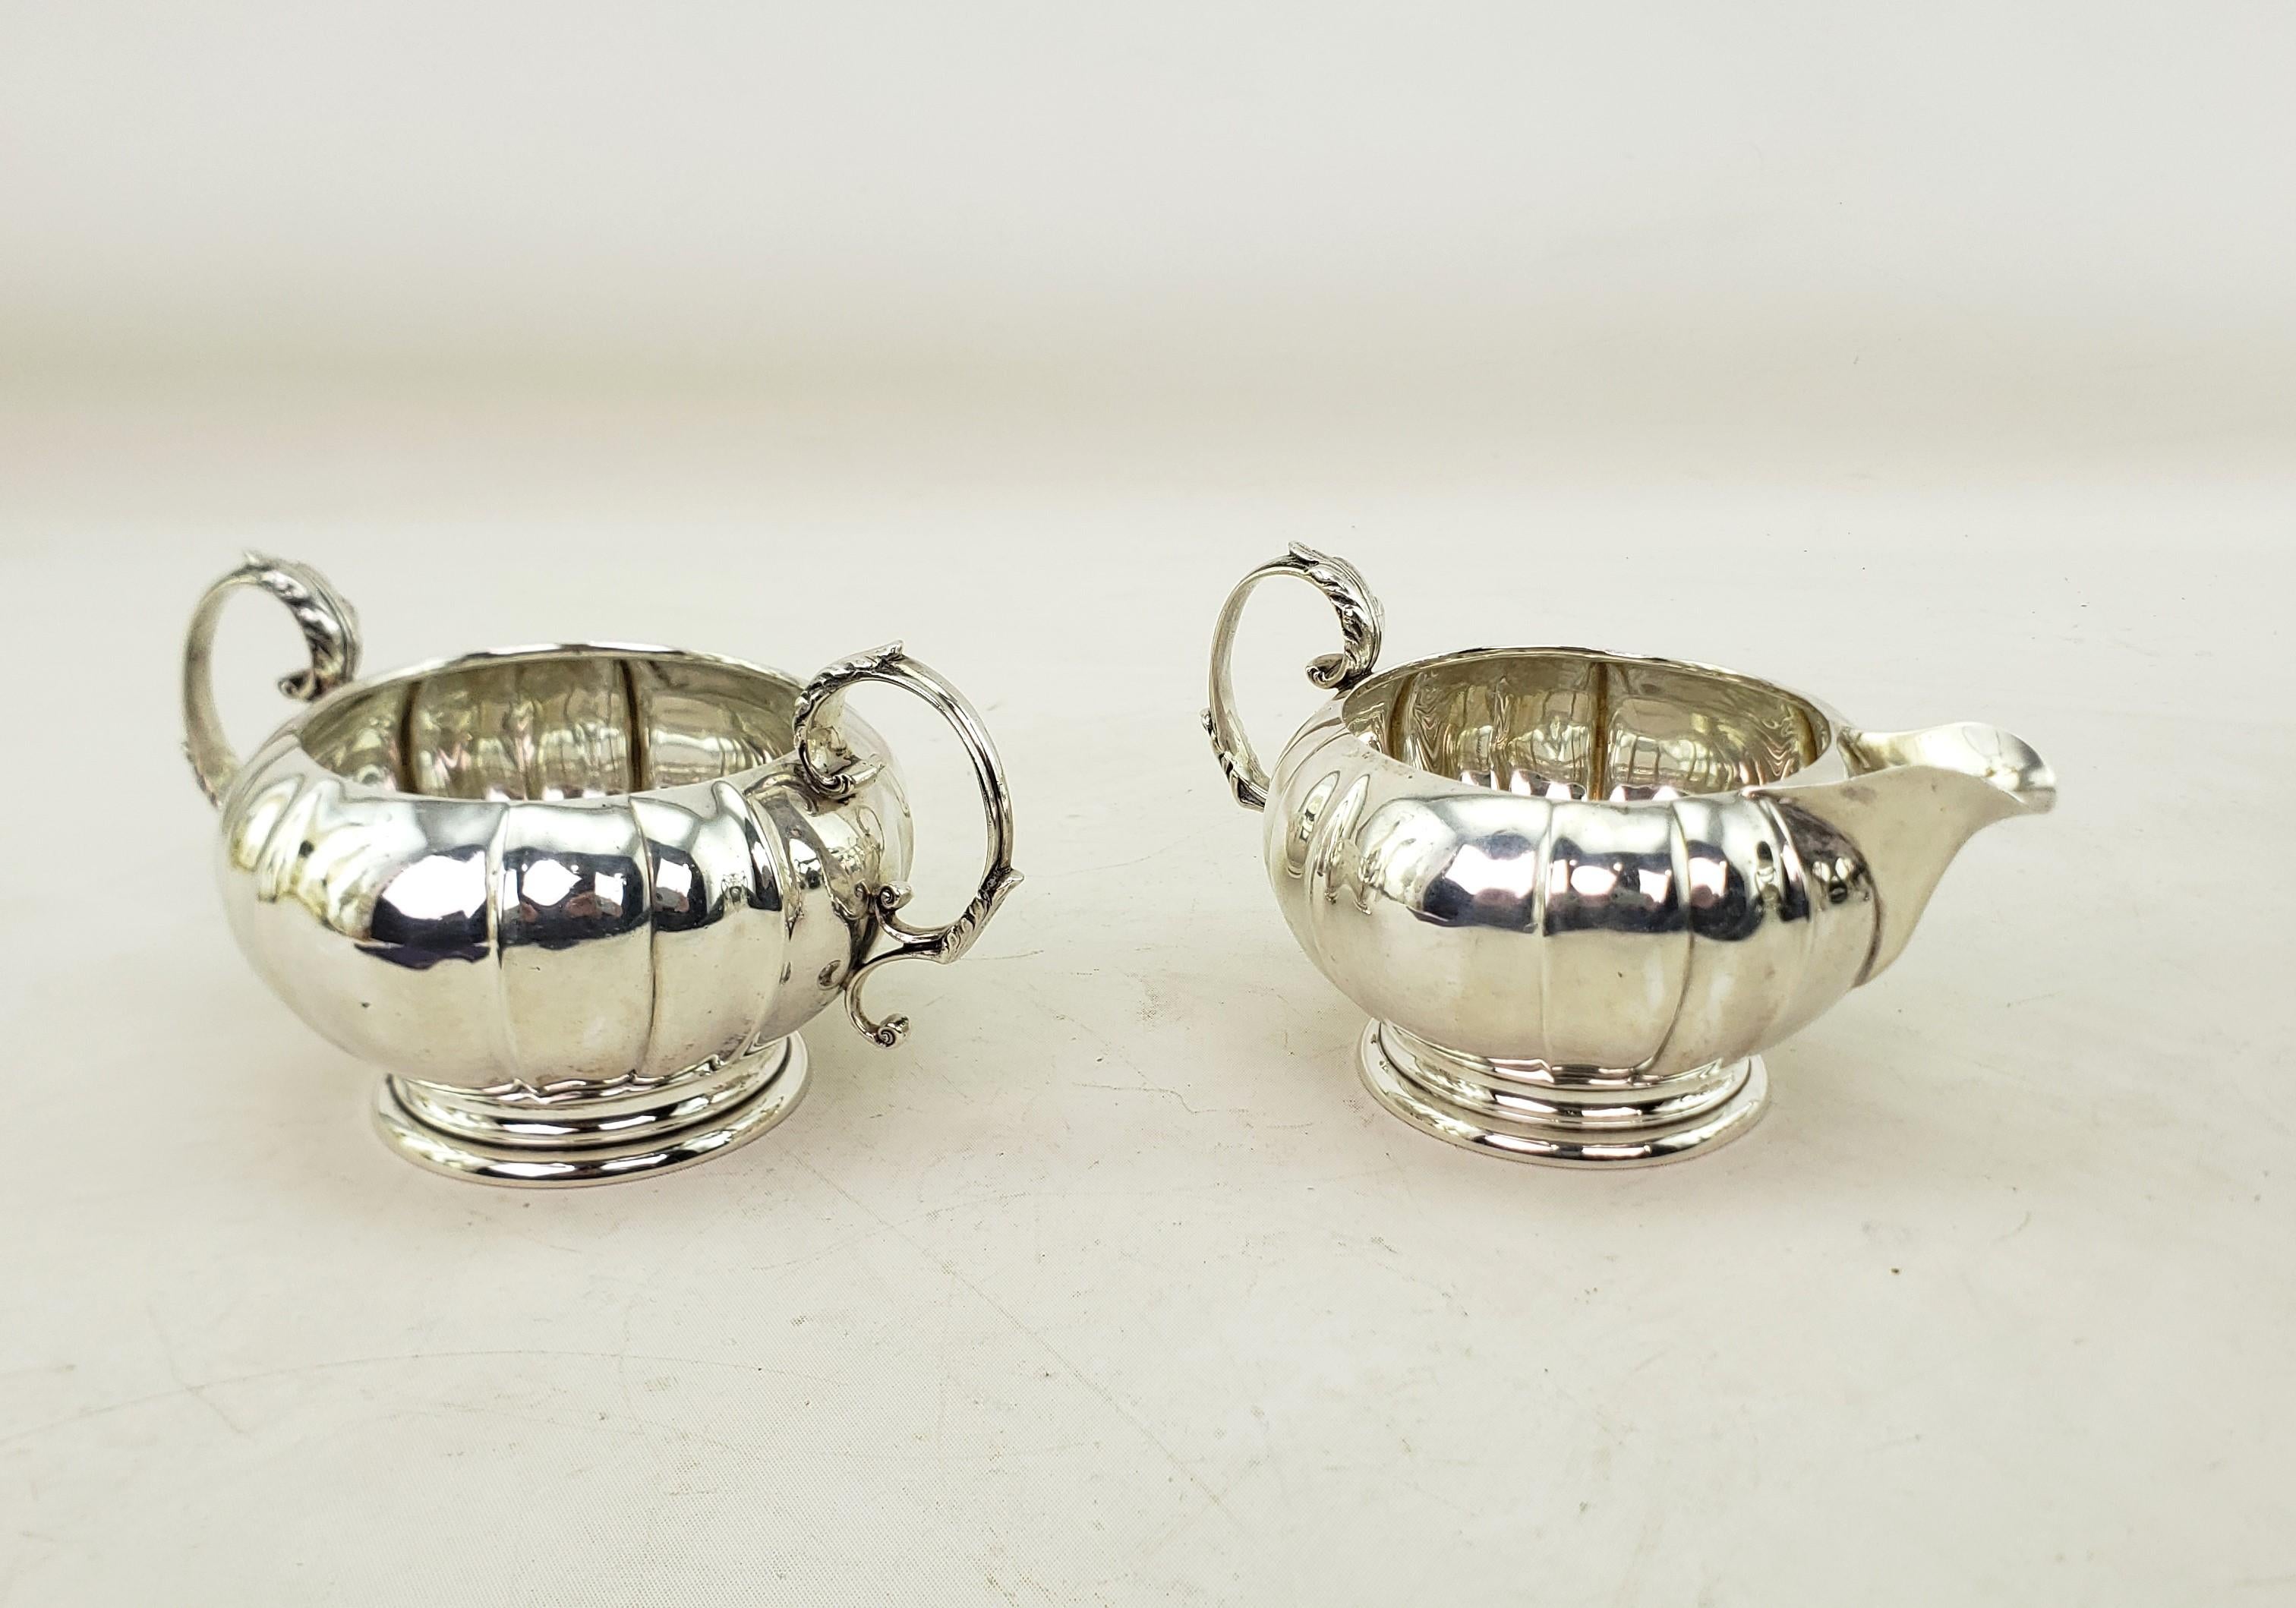 Antique Birks Sterling Silver Tea or Coffee Set with Creamer & Sugar Bowl For Sale 9